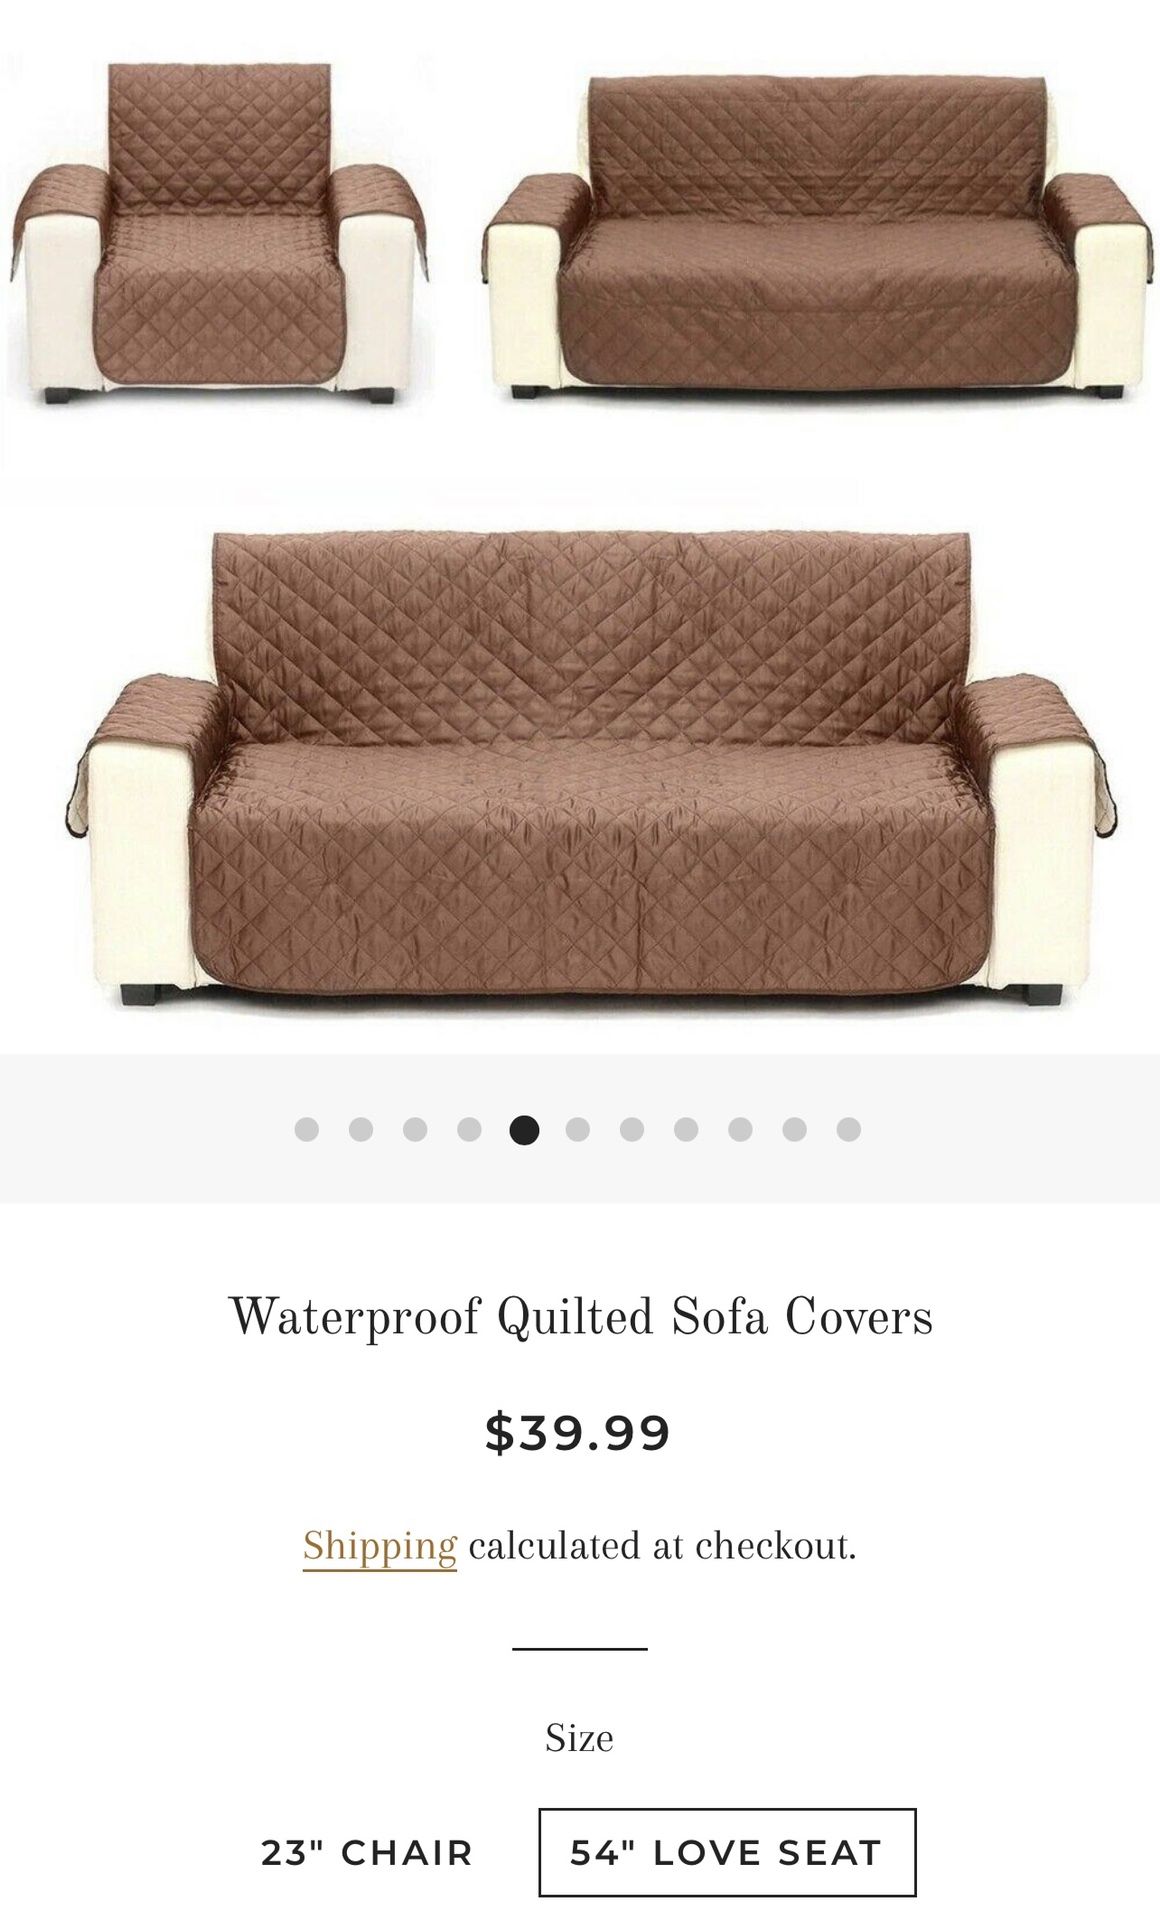 Waterproof Quilted Sofá Cover Loveseat 54”